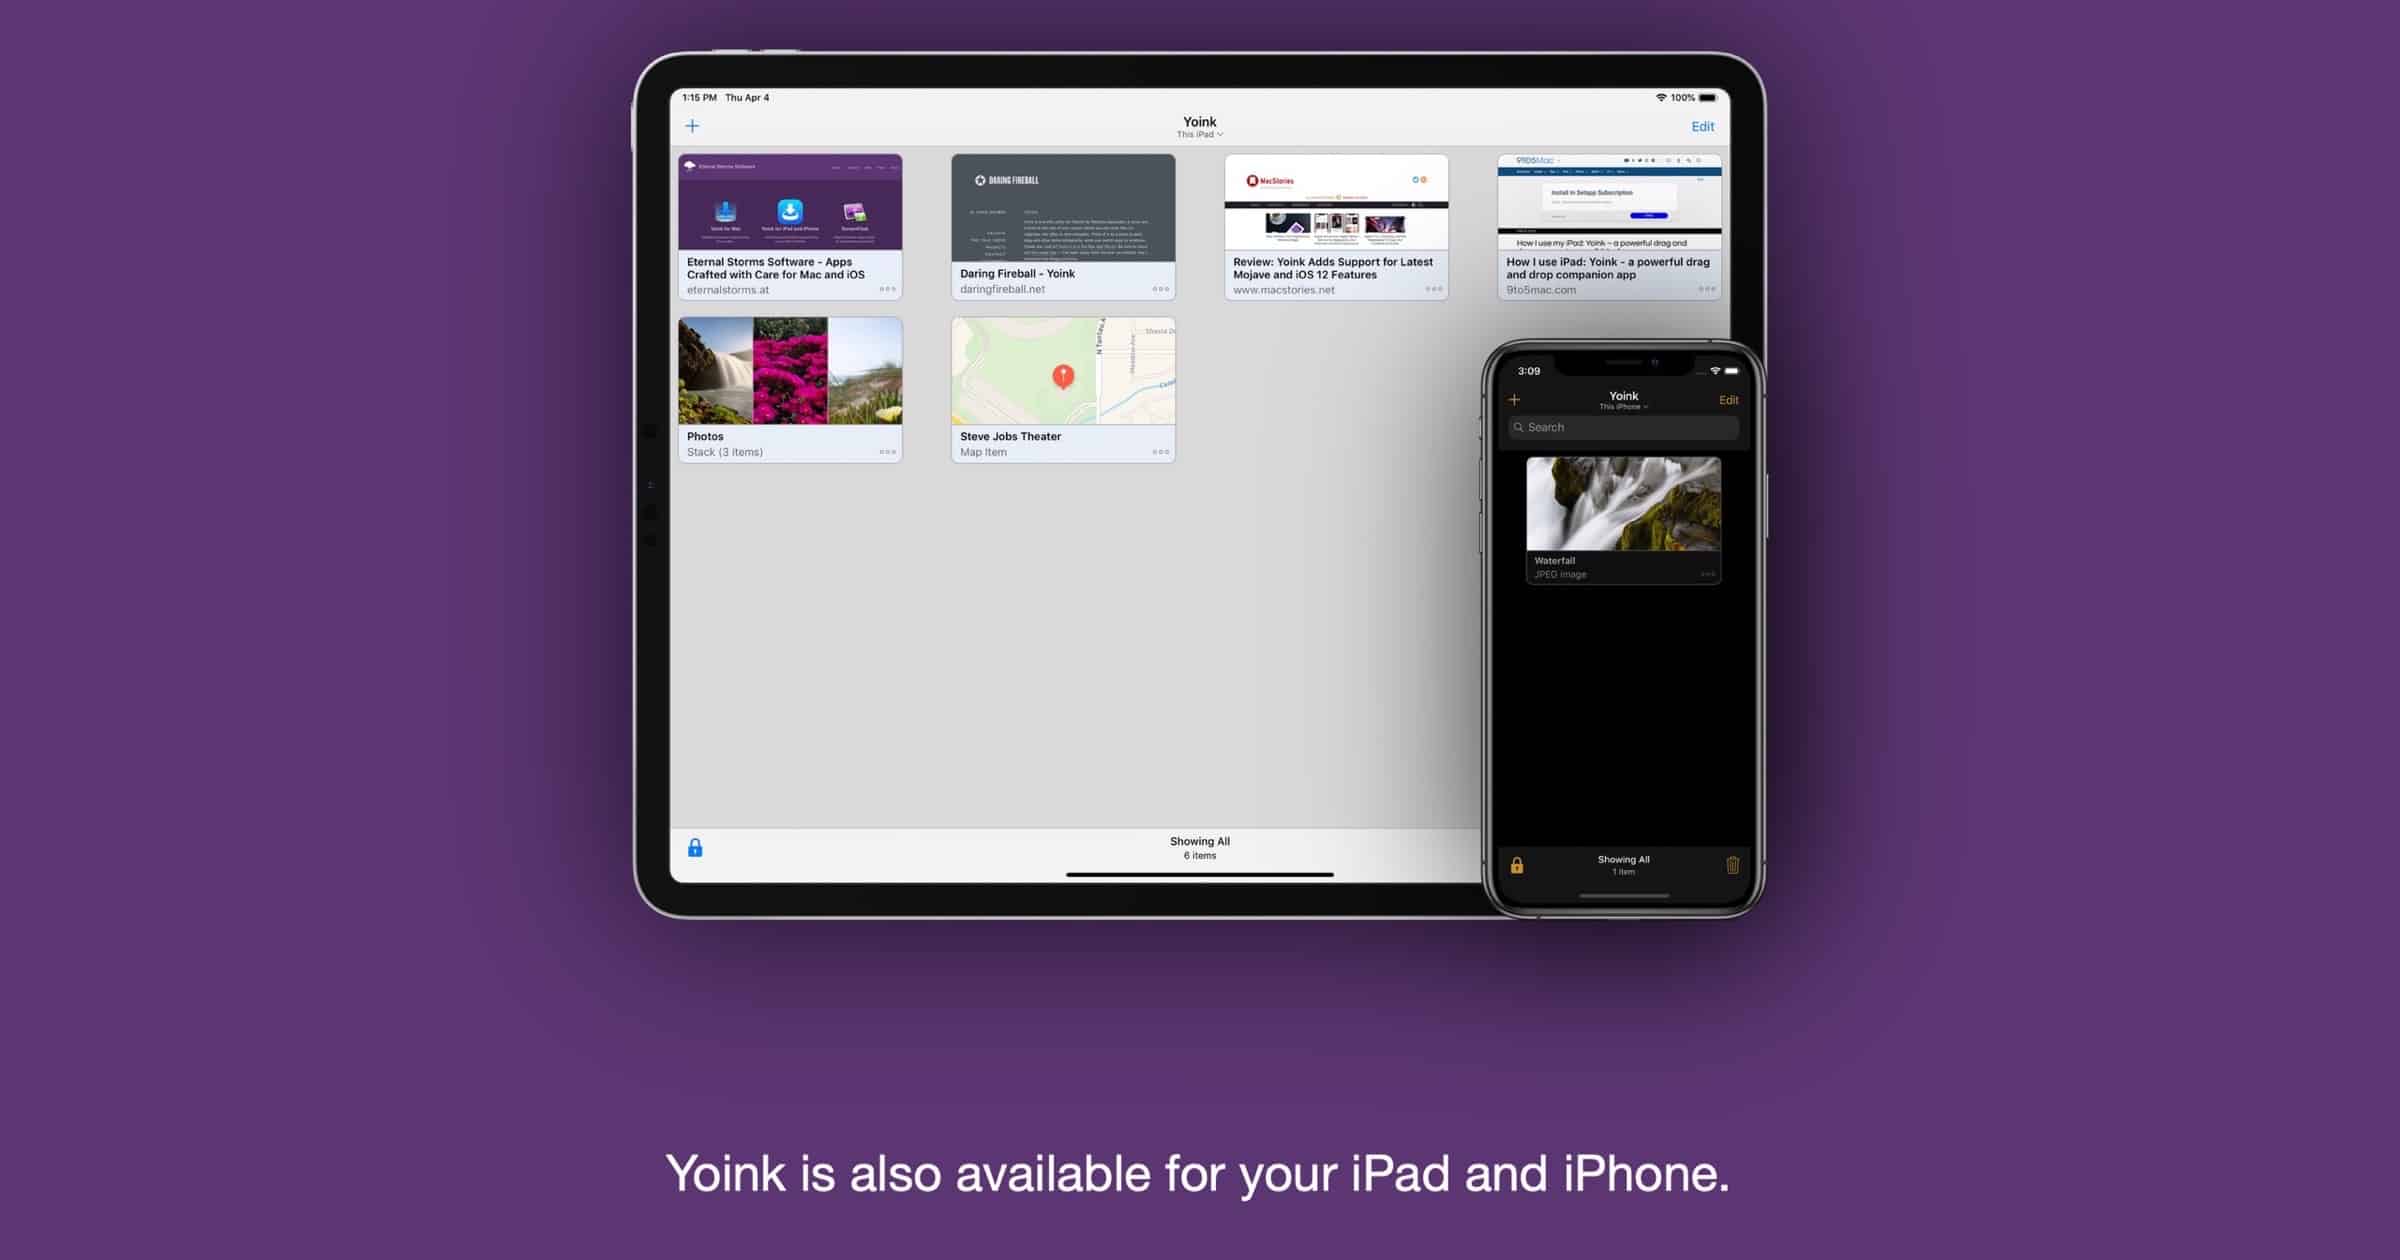 ‘Yoink’ macOS Big Sur Support Added With Version 3.5.11